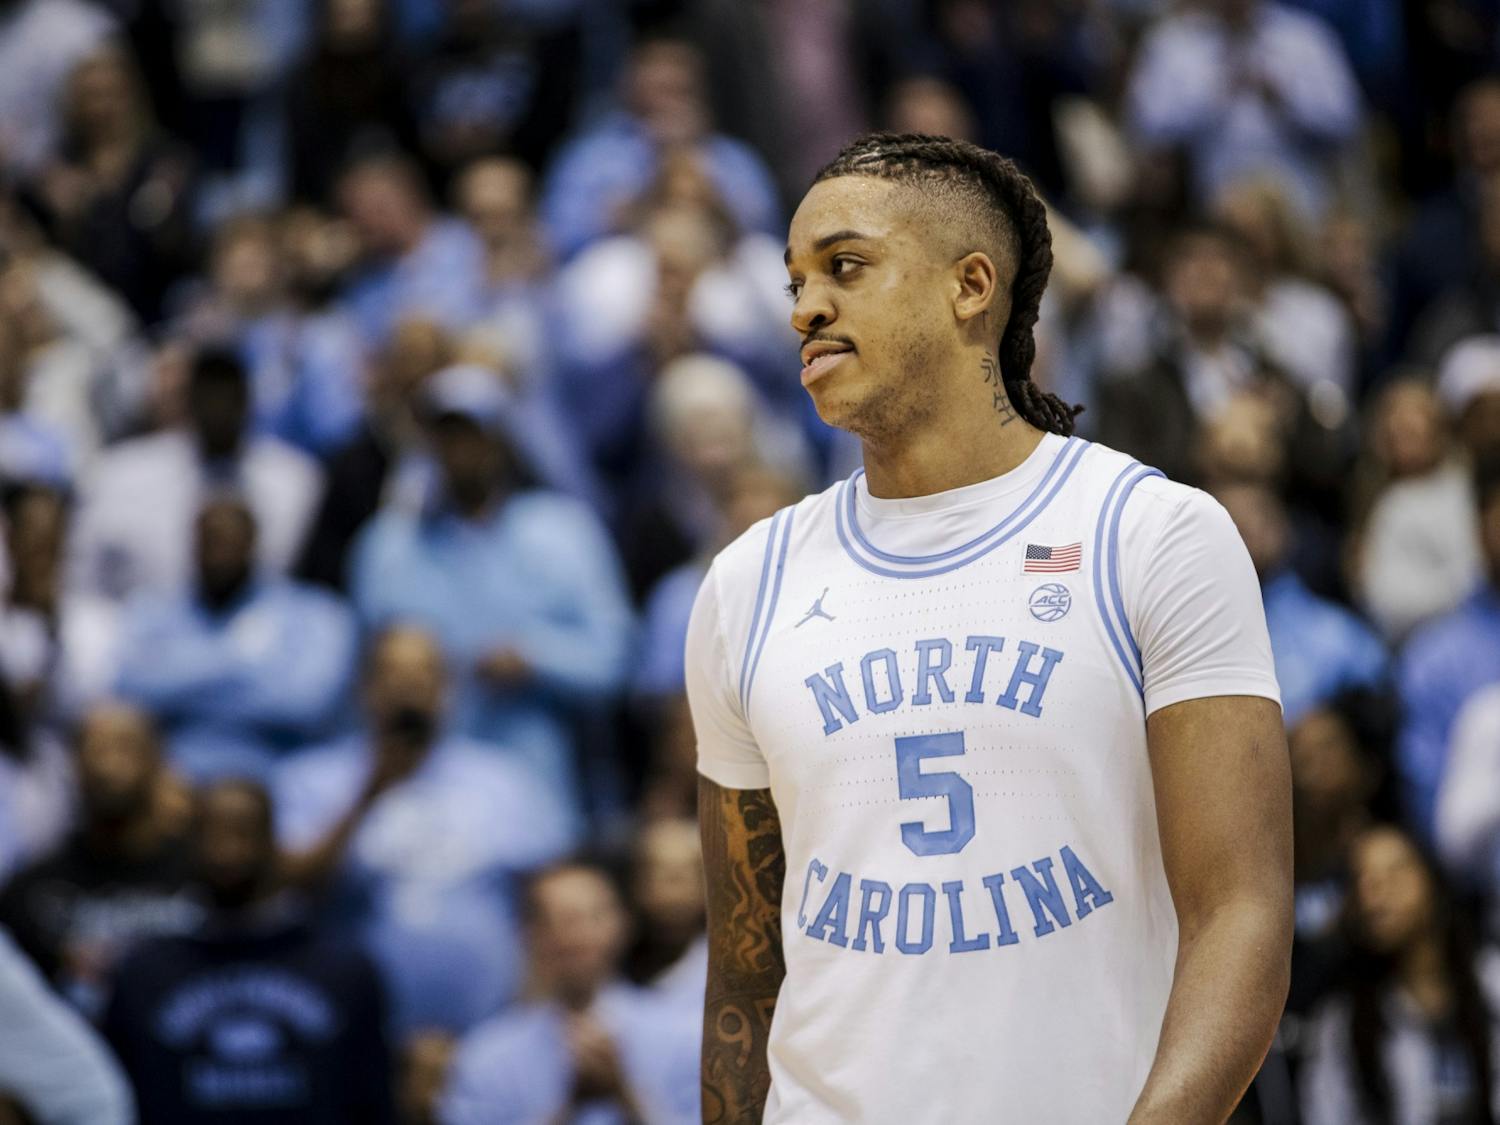 UNC senior forward Armando Bacot (5) walks off the court after setting a school record for most career double-doubles during a basketball game against N.C. State on Saturday, Jan. 21, 2023, in the Dean E. Smith Center. UNC won 80-69.